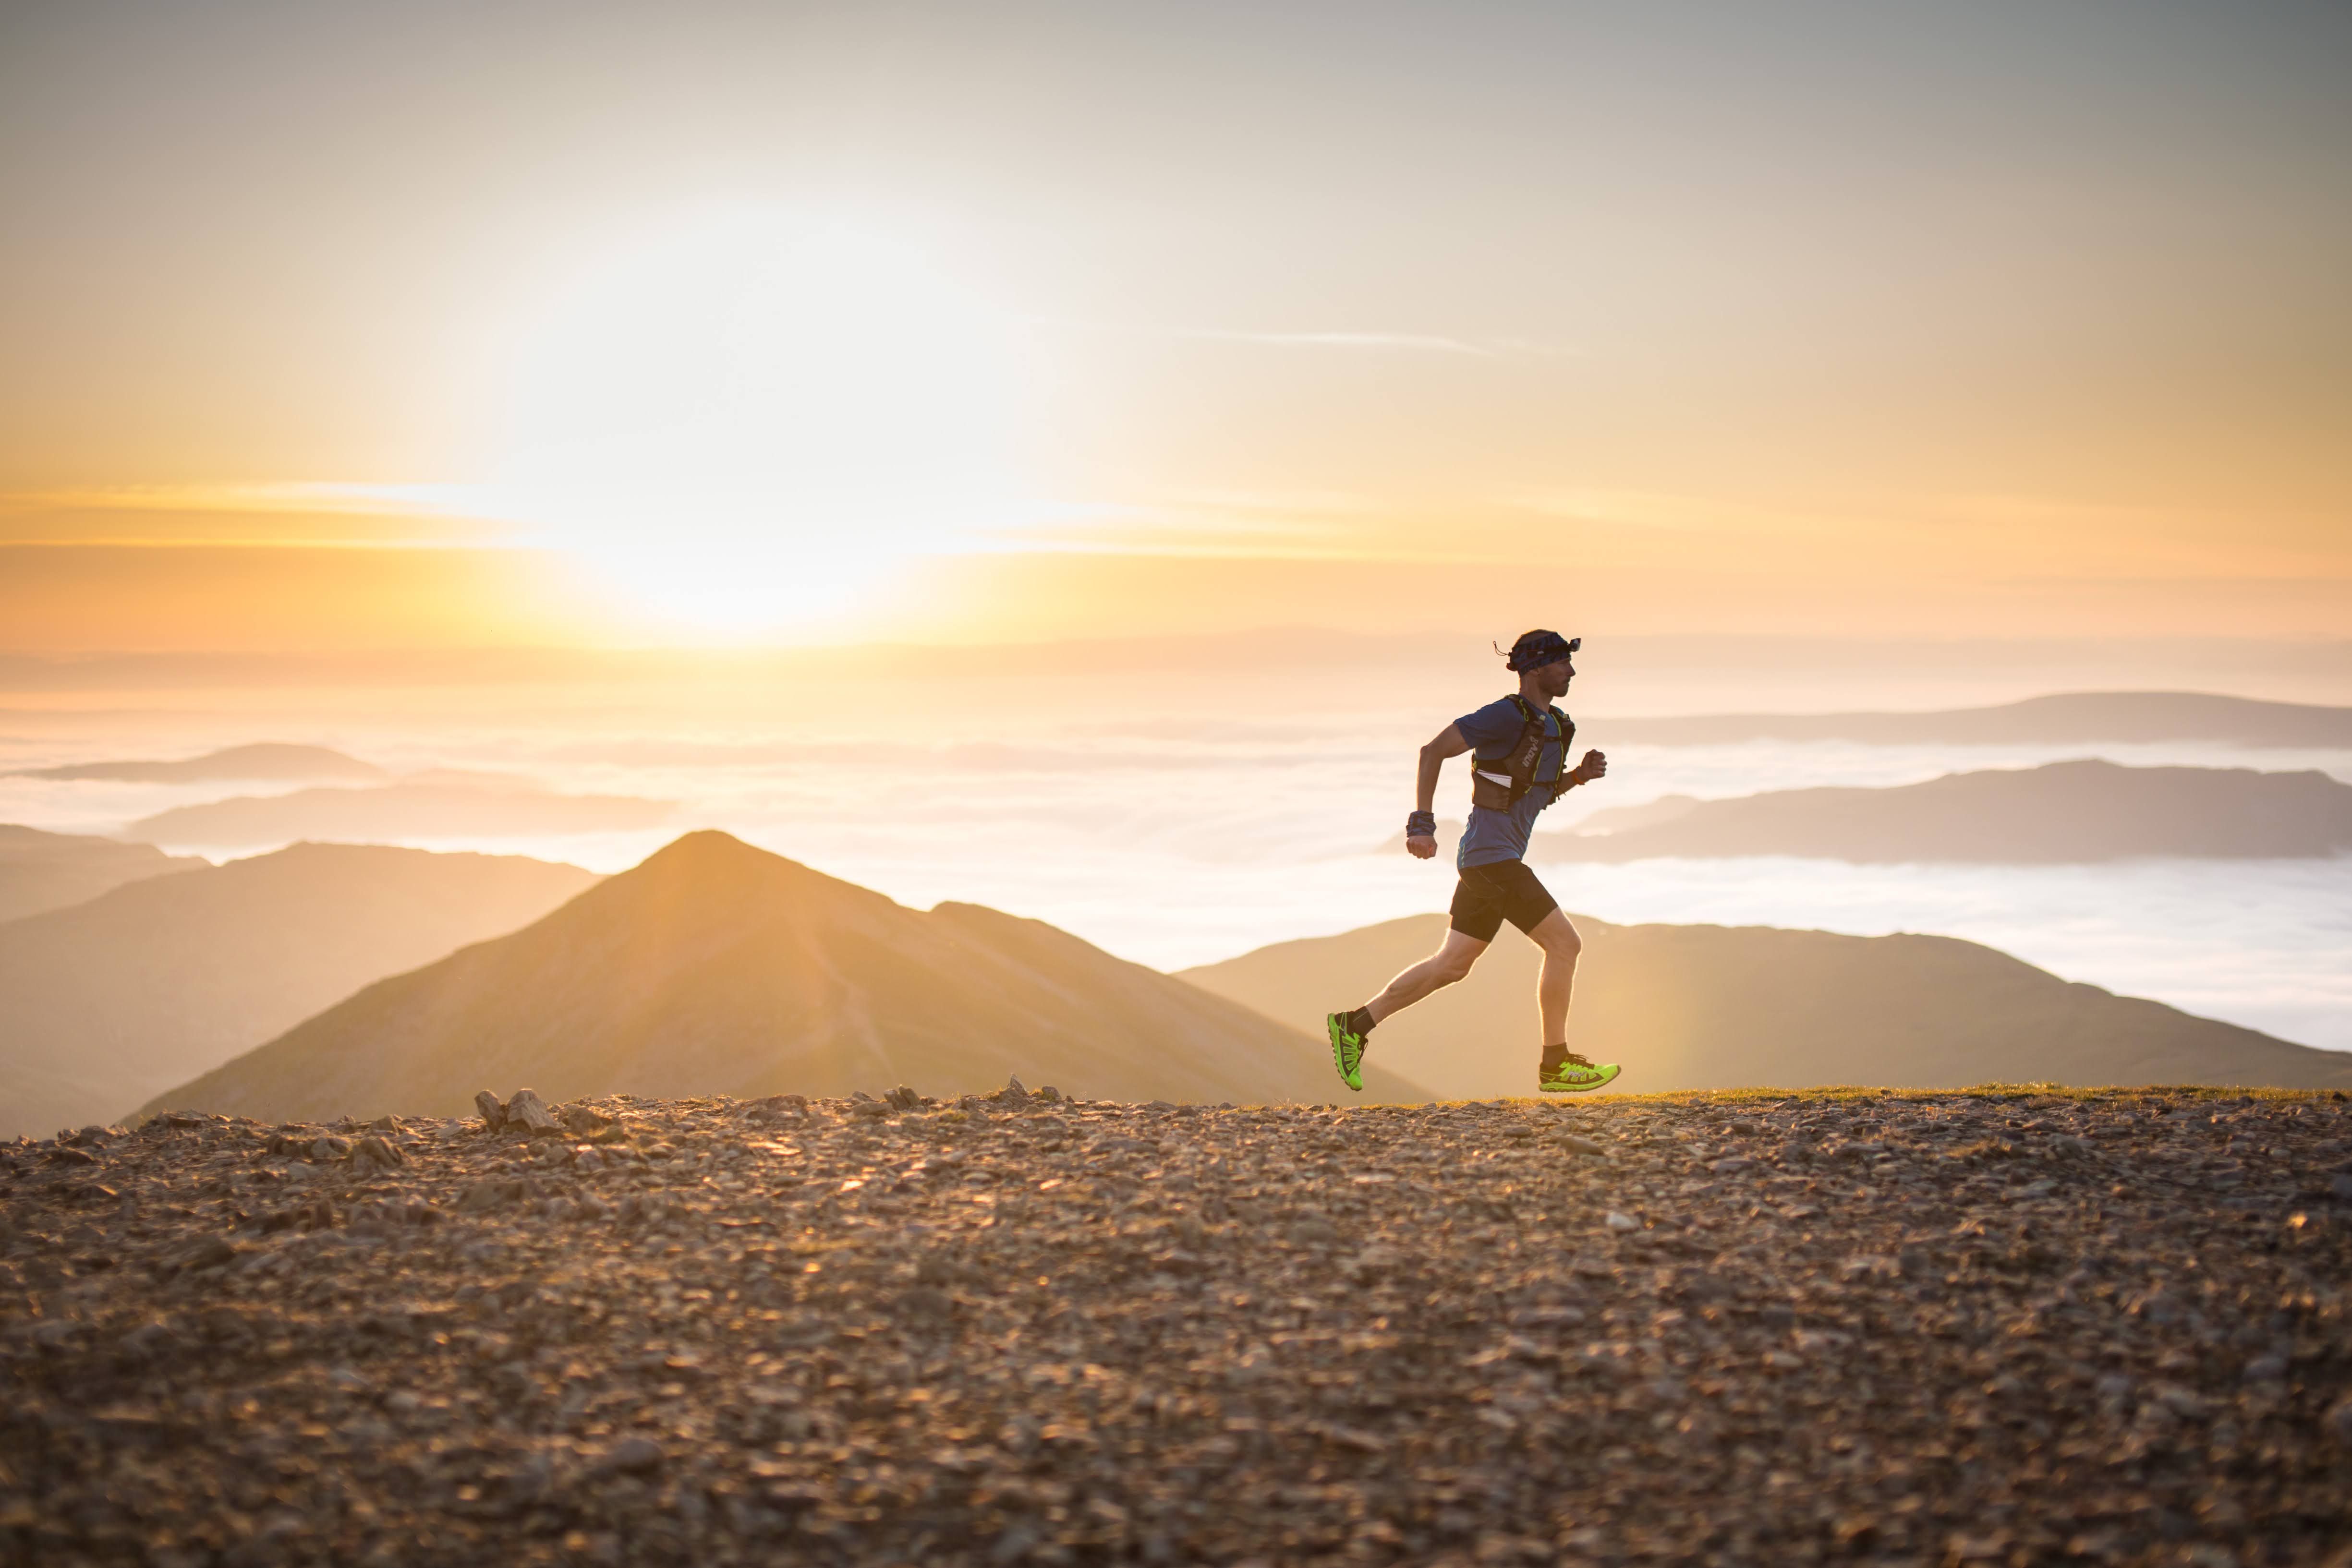 10 best hill training workouts